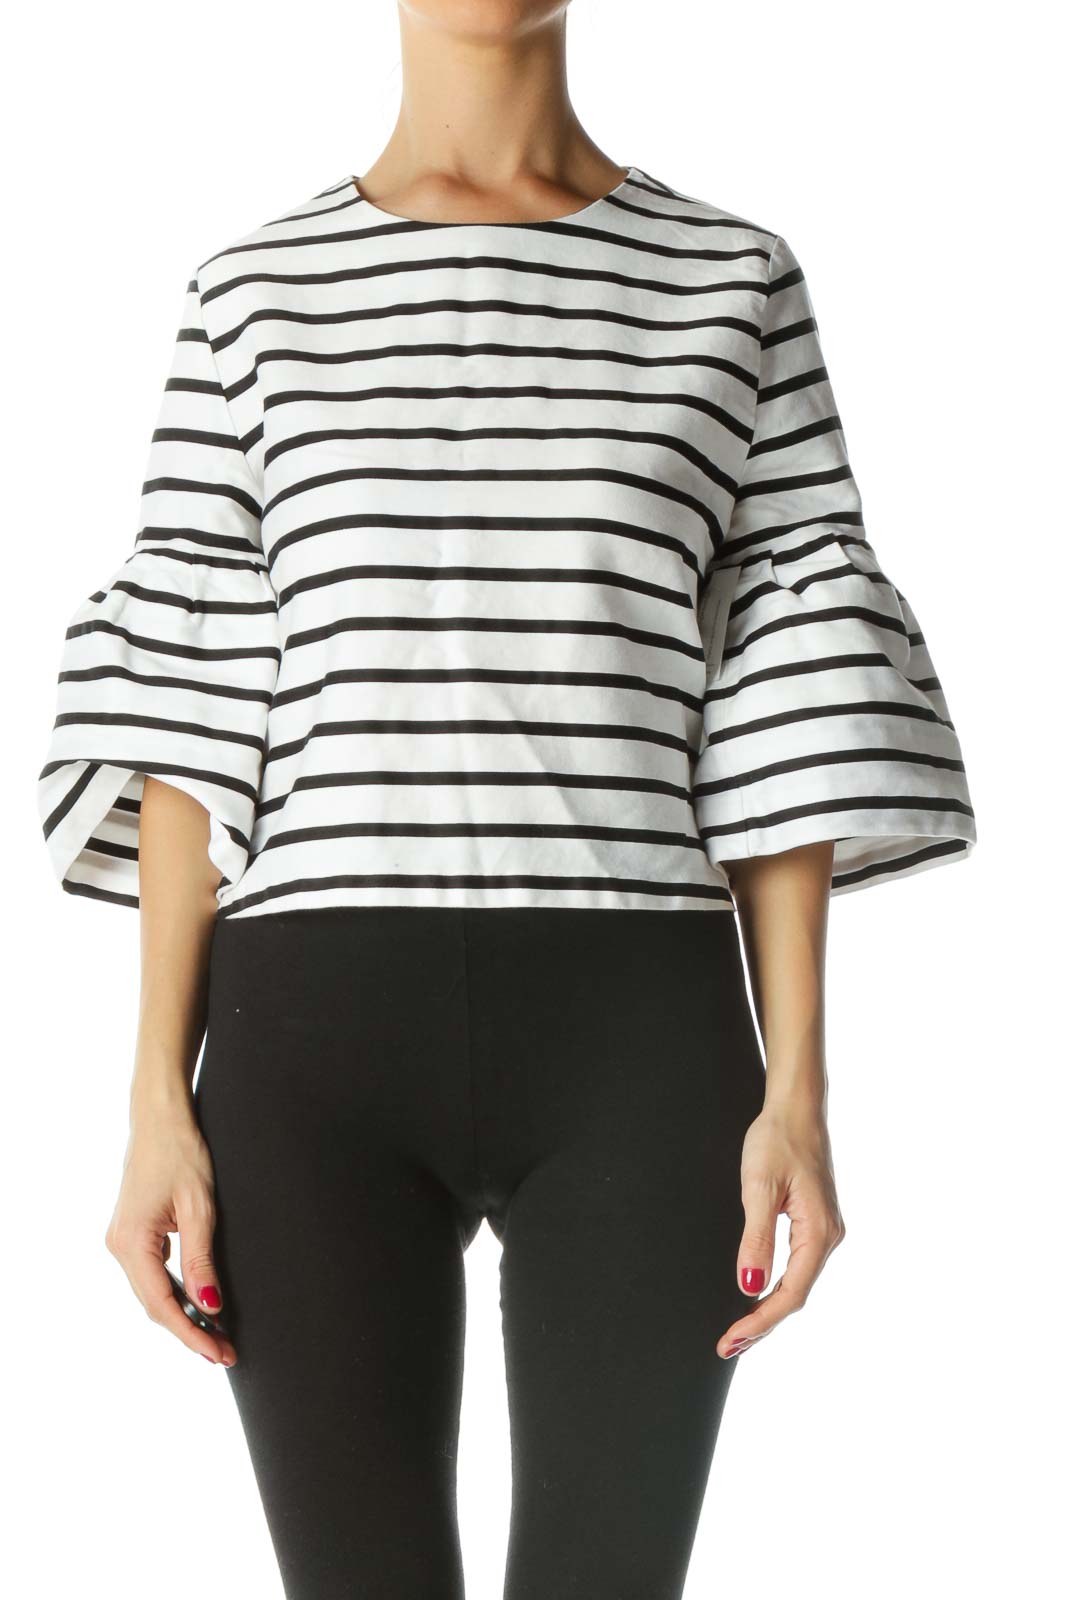 Black White Striped Flared Sleeves Top Front